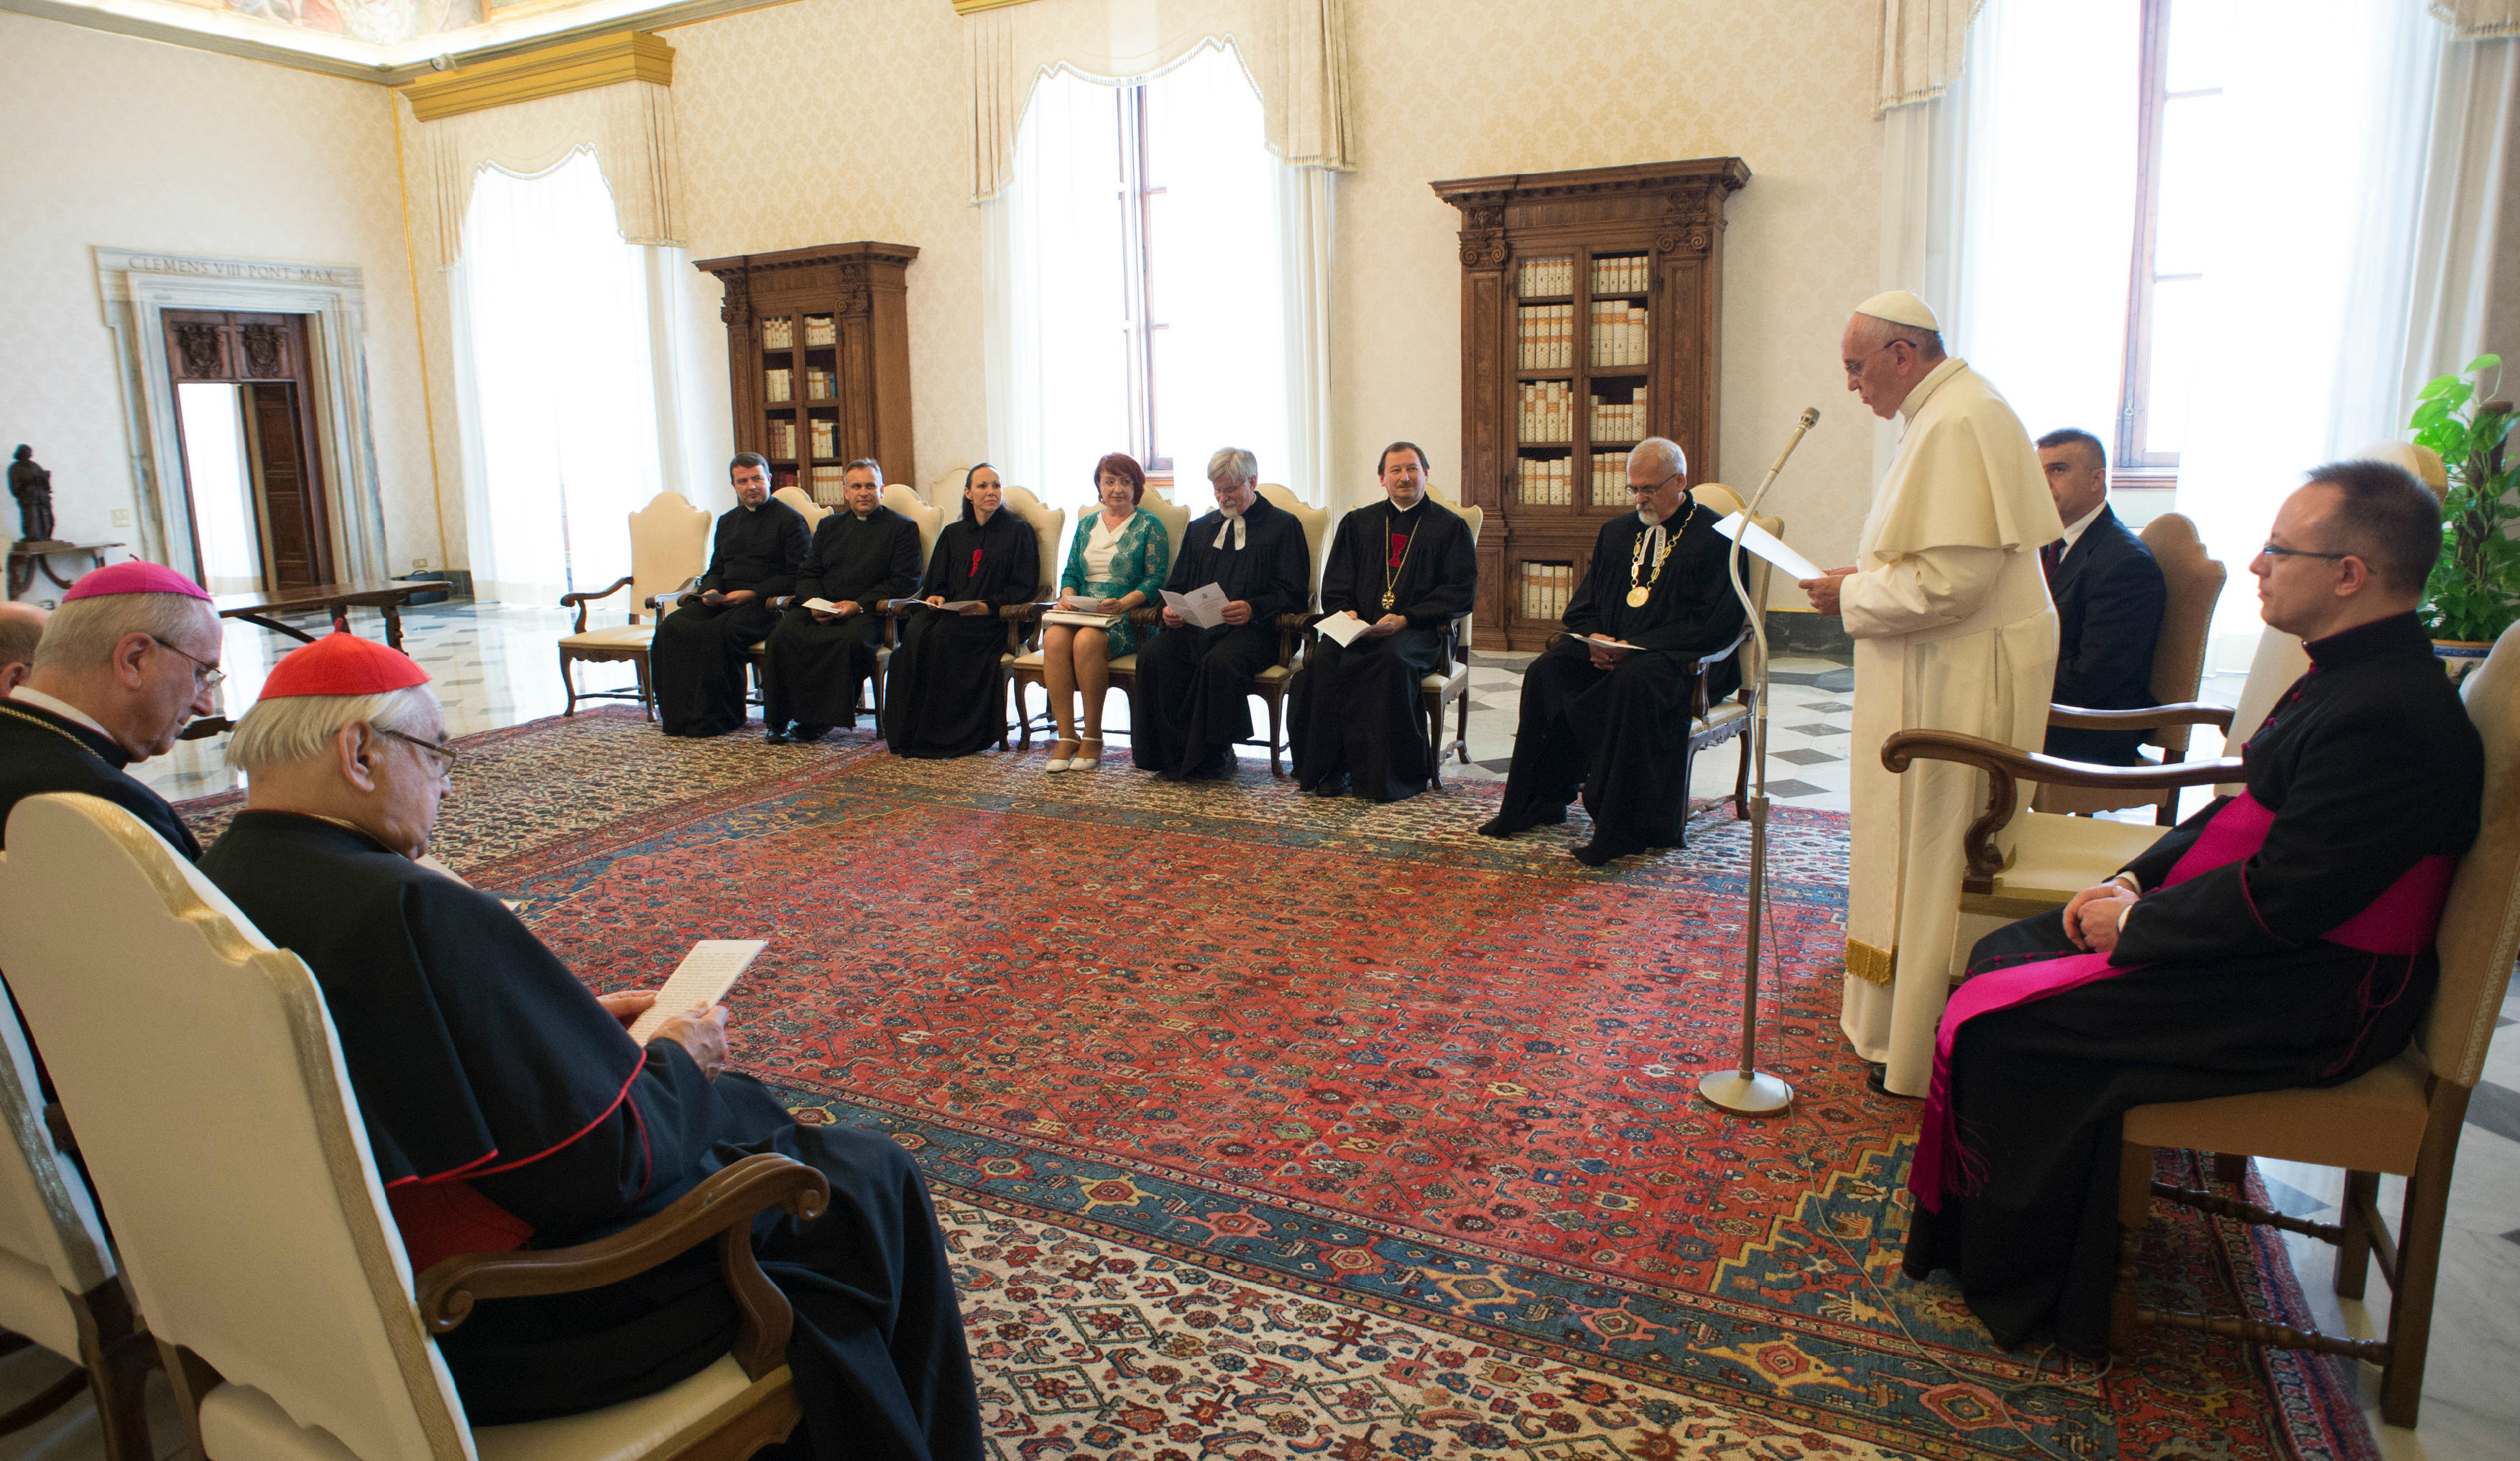 Pope meets with representatives of the Czechoslovak Hussite Church and the Evangelical Church of Czech Brethren